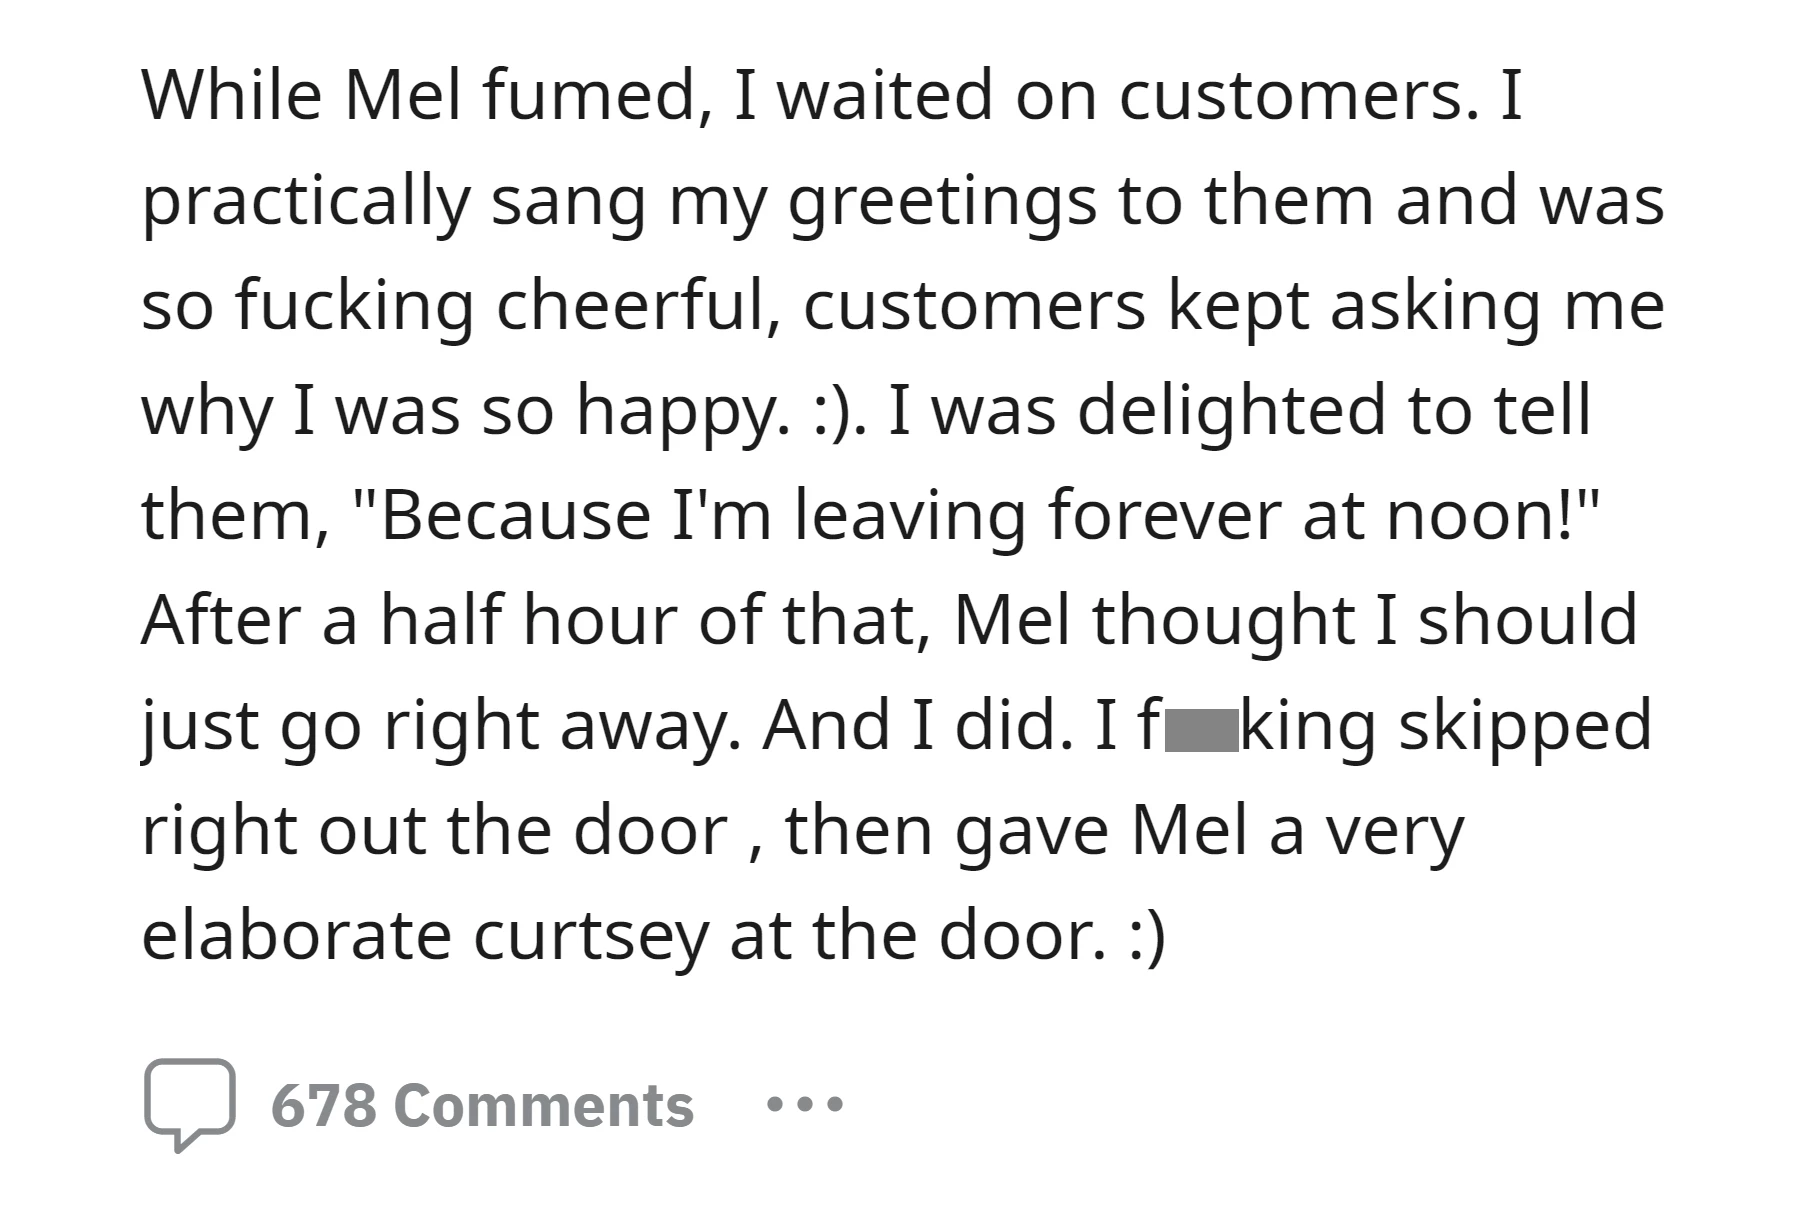 Her supervisor asked her to immediately go away, and she did